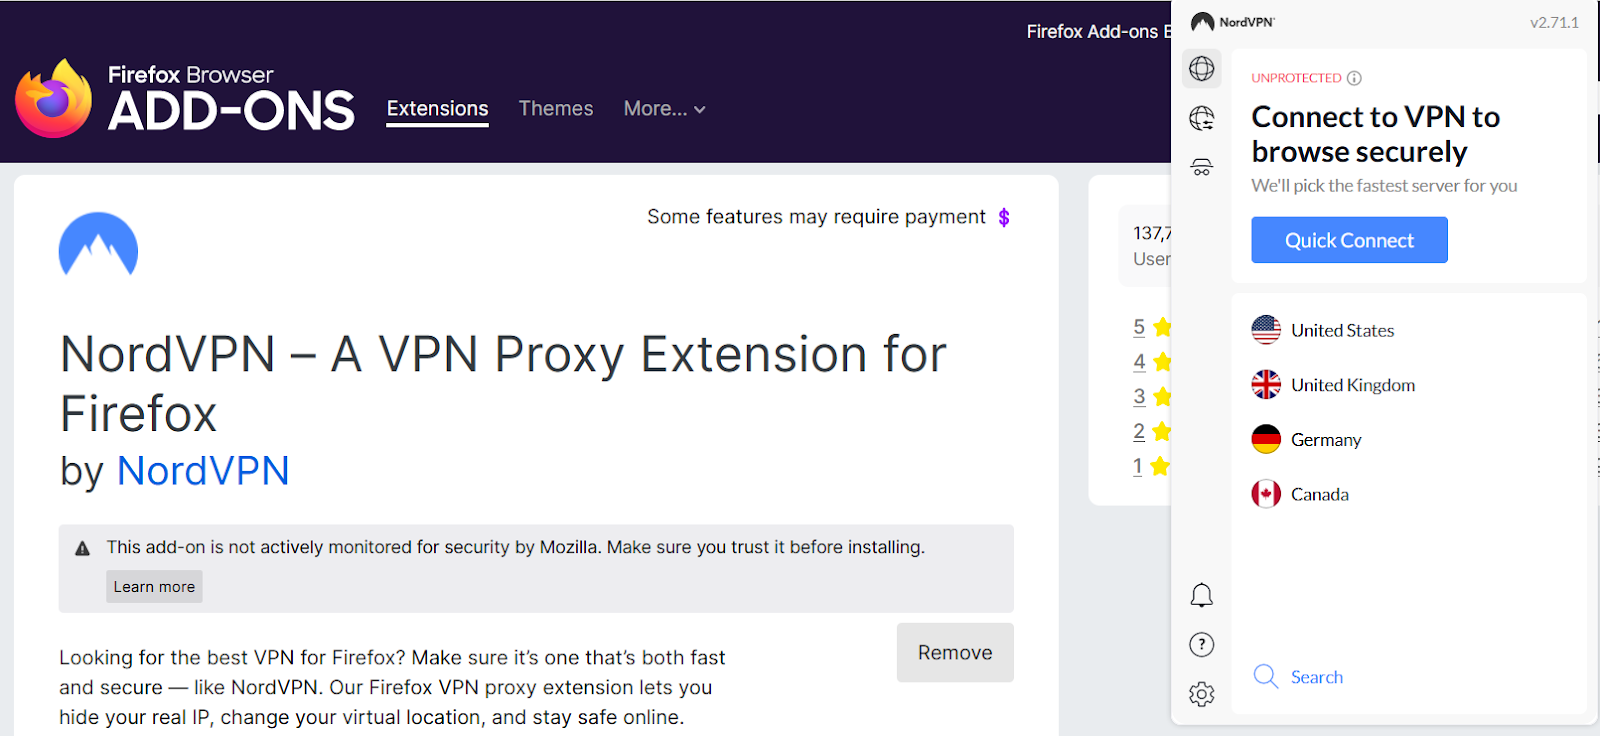 NordVPN Browser Extentions